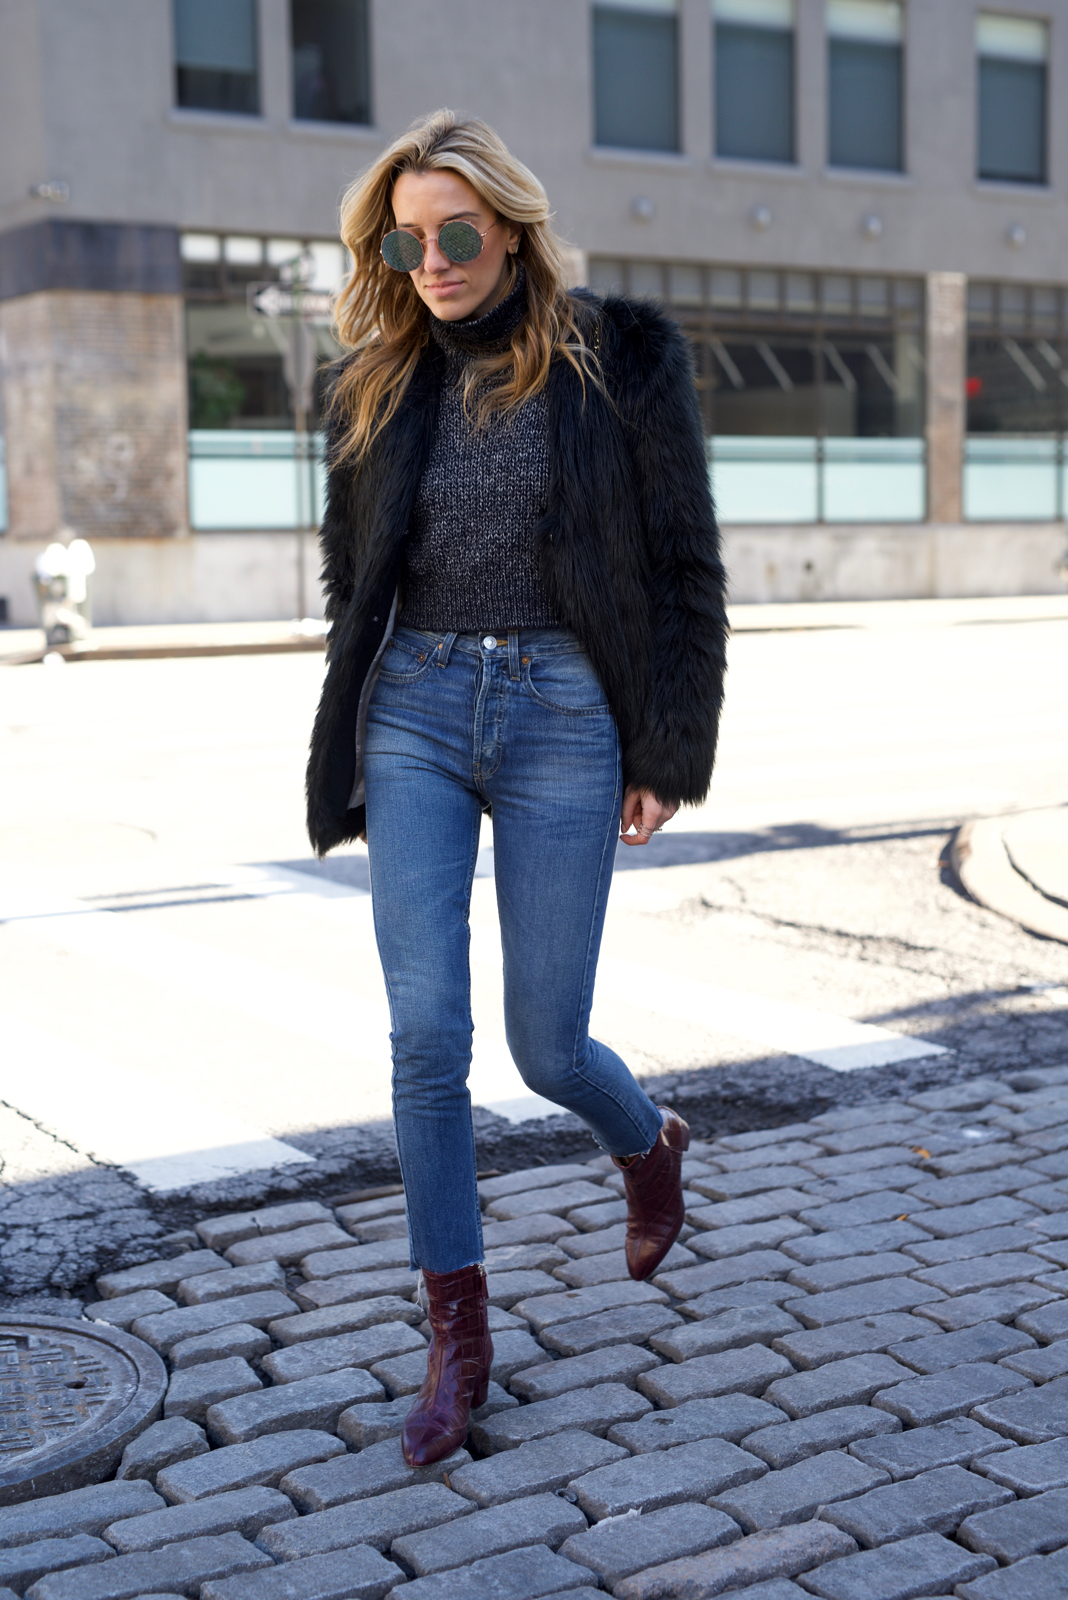 The Best High Waisted Jeans & Cropped Sweater - Lisa D CahueLisa D Cahue